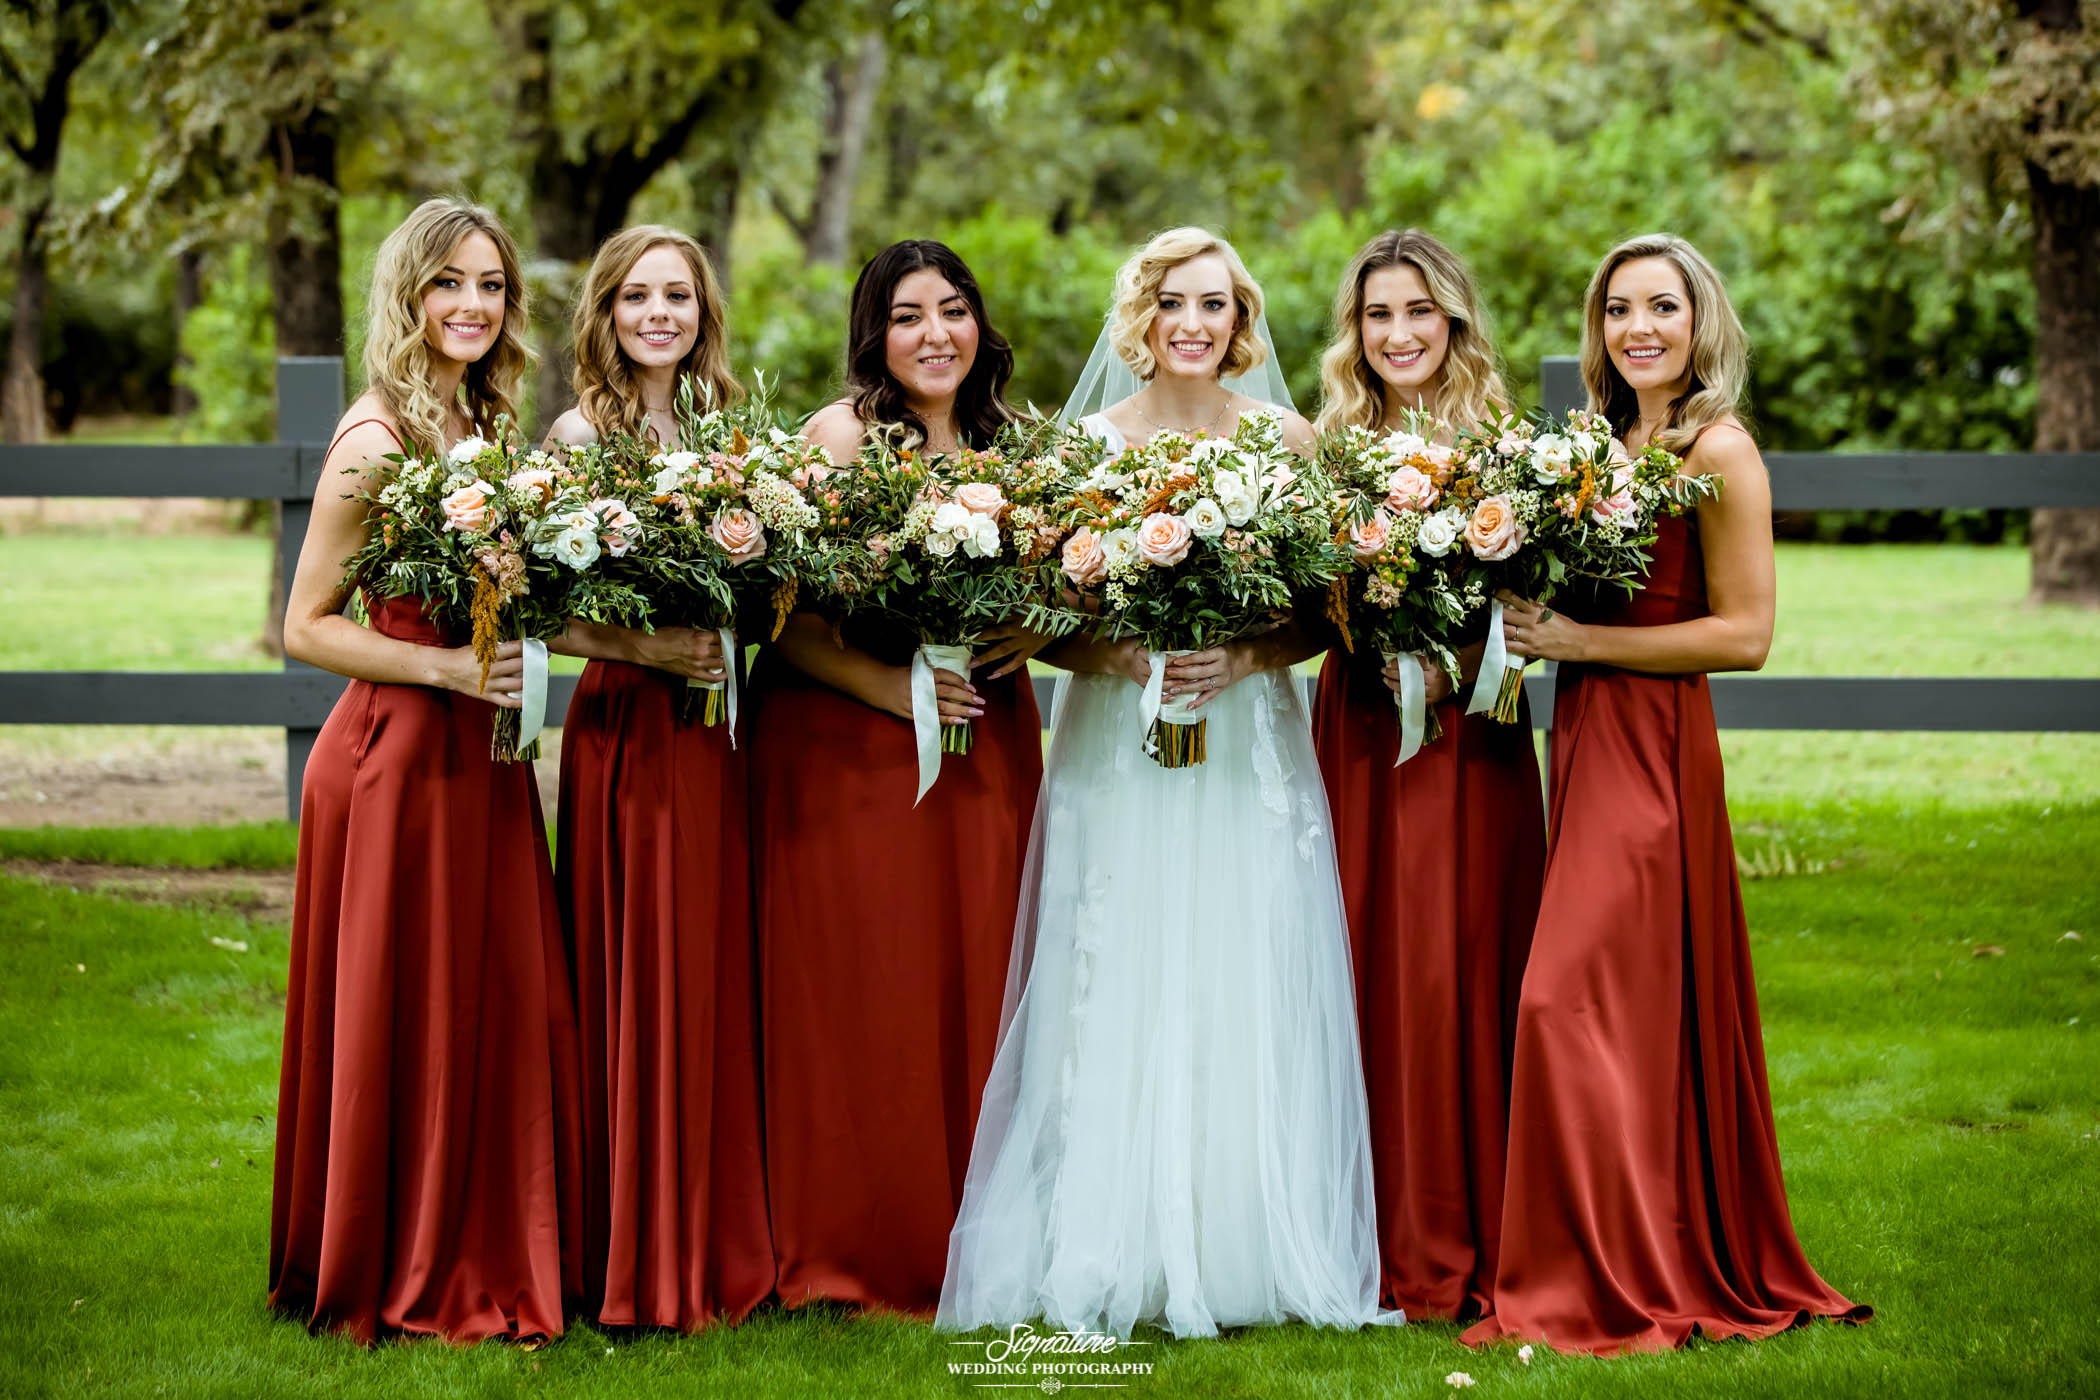 Bride and bridesmaids with bouquets smiling